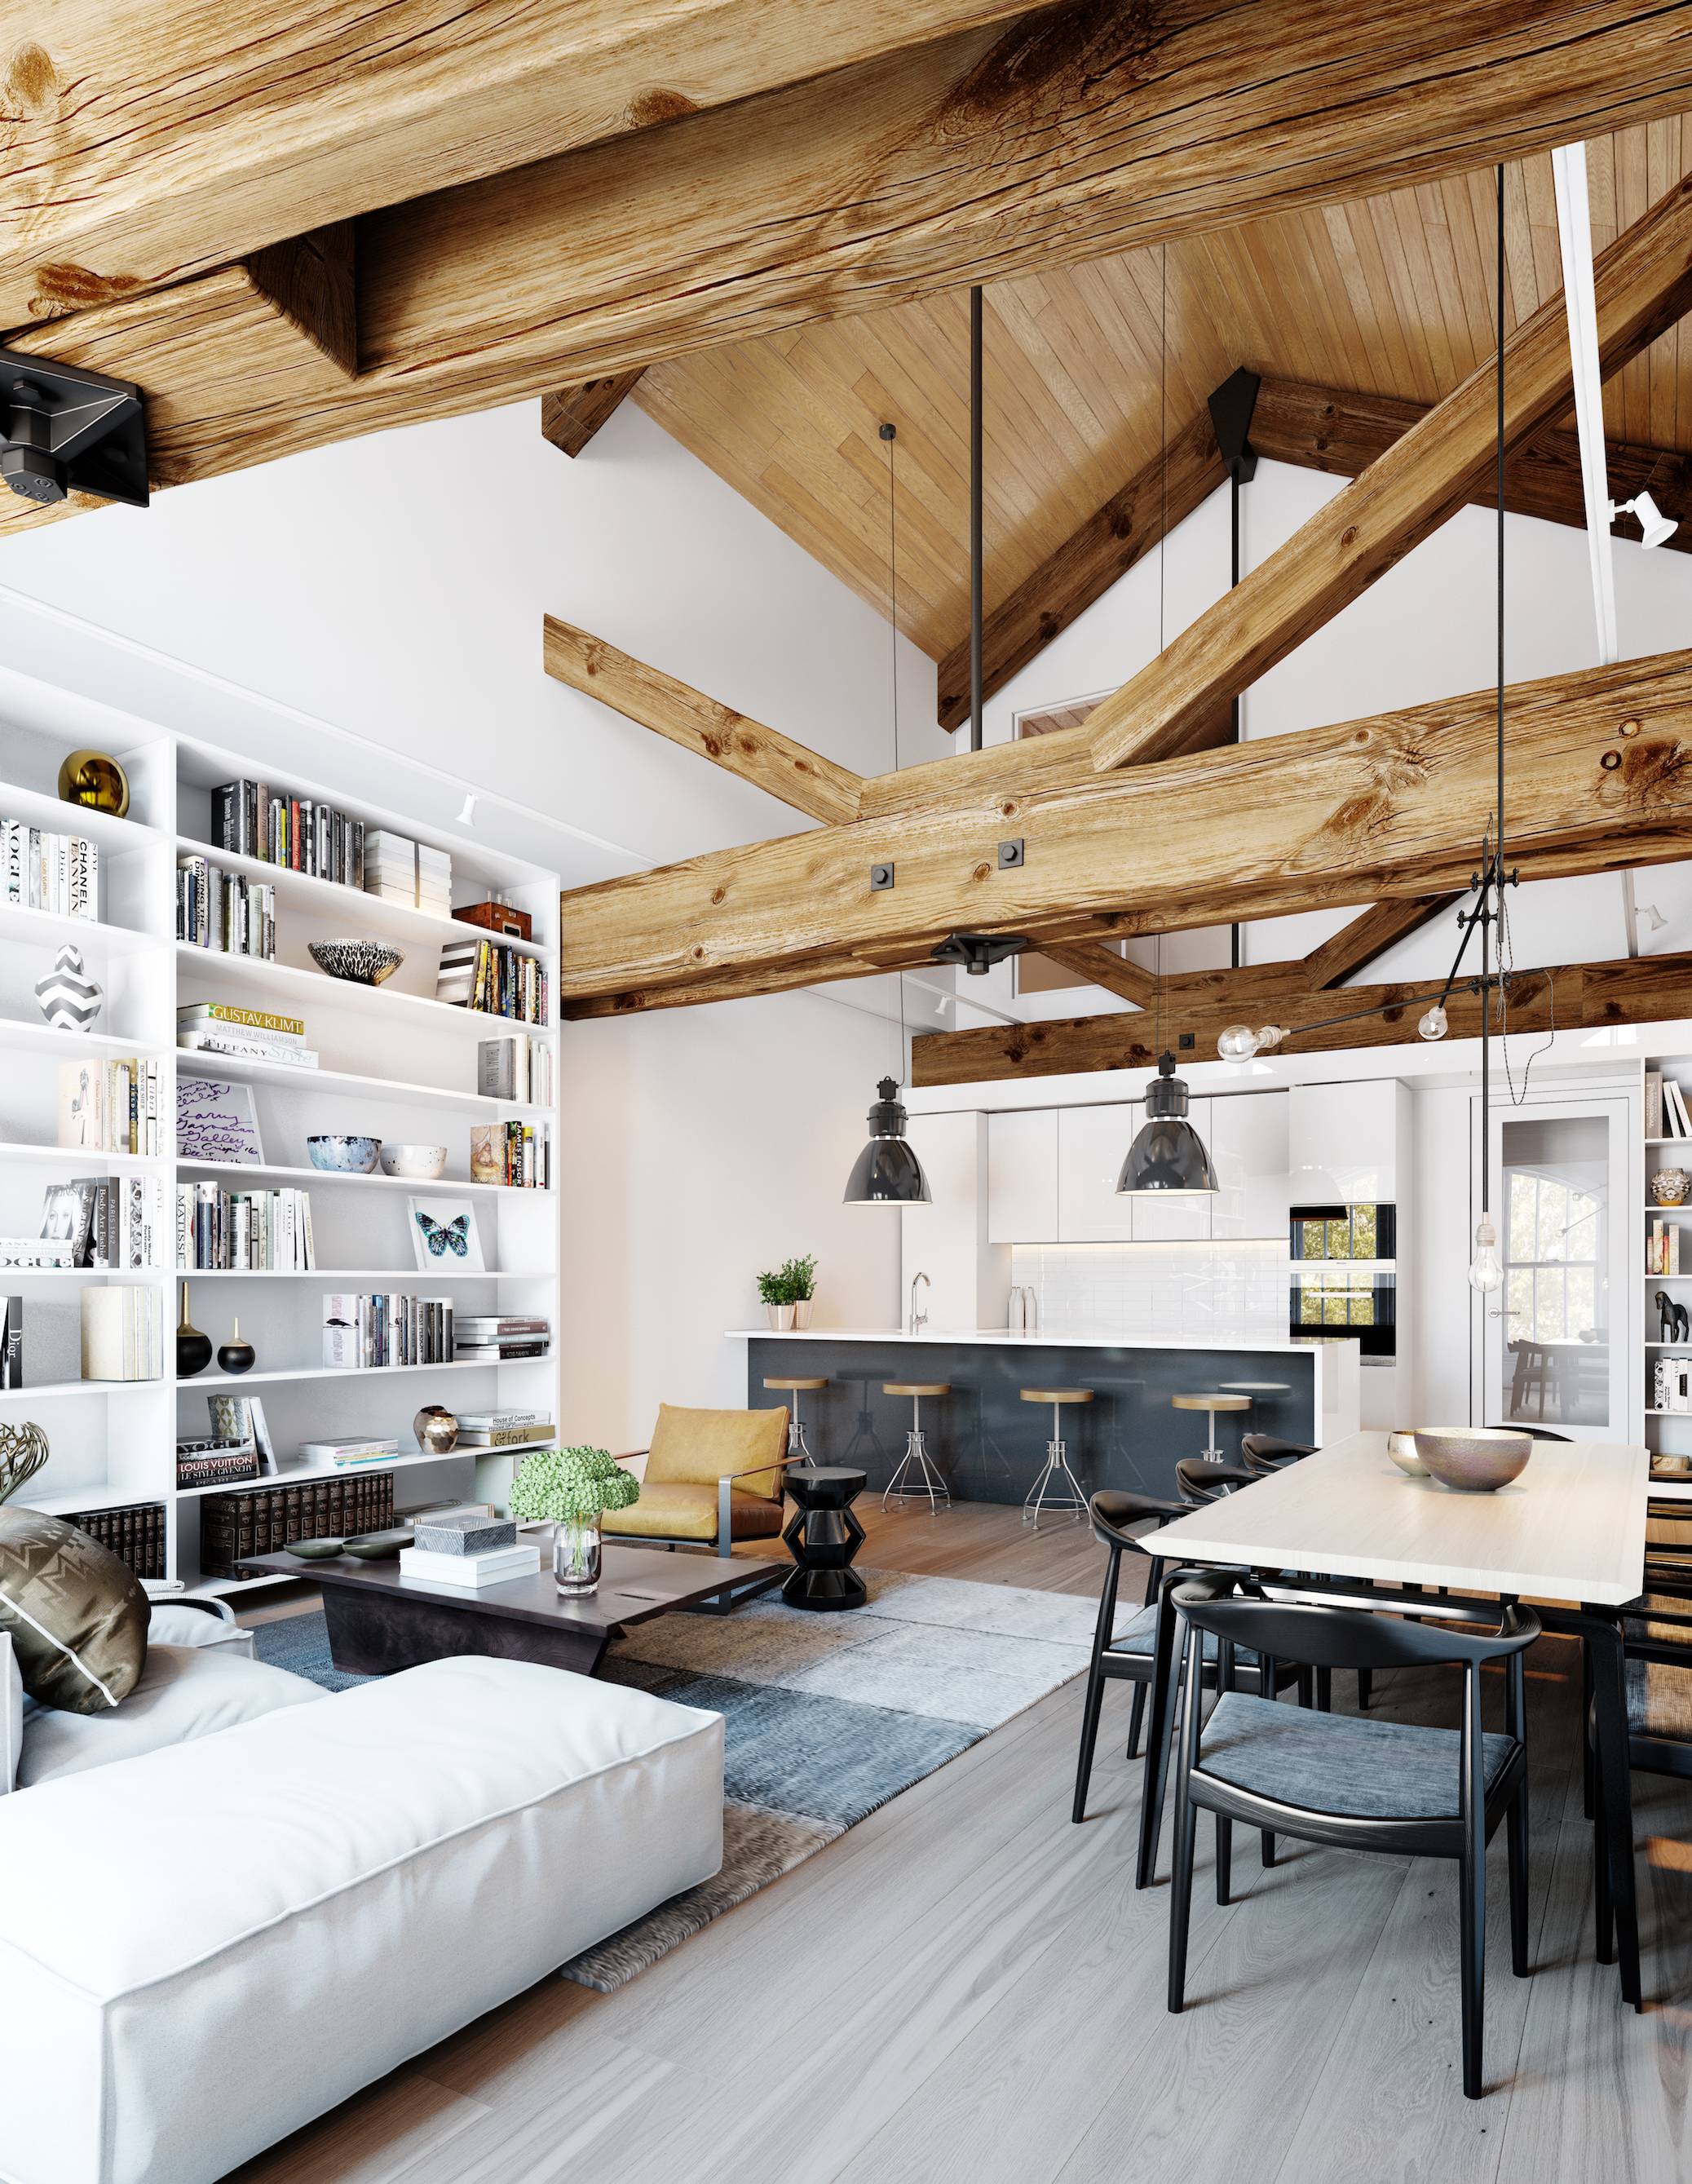 1 Bedroom New York Style Coopers' Lofts For Sale In London's Oldest Brewery, SW18